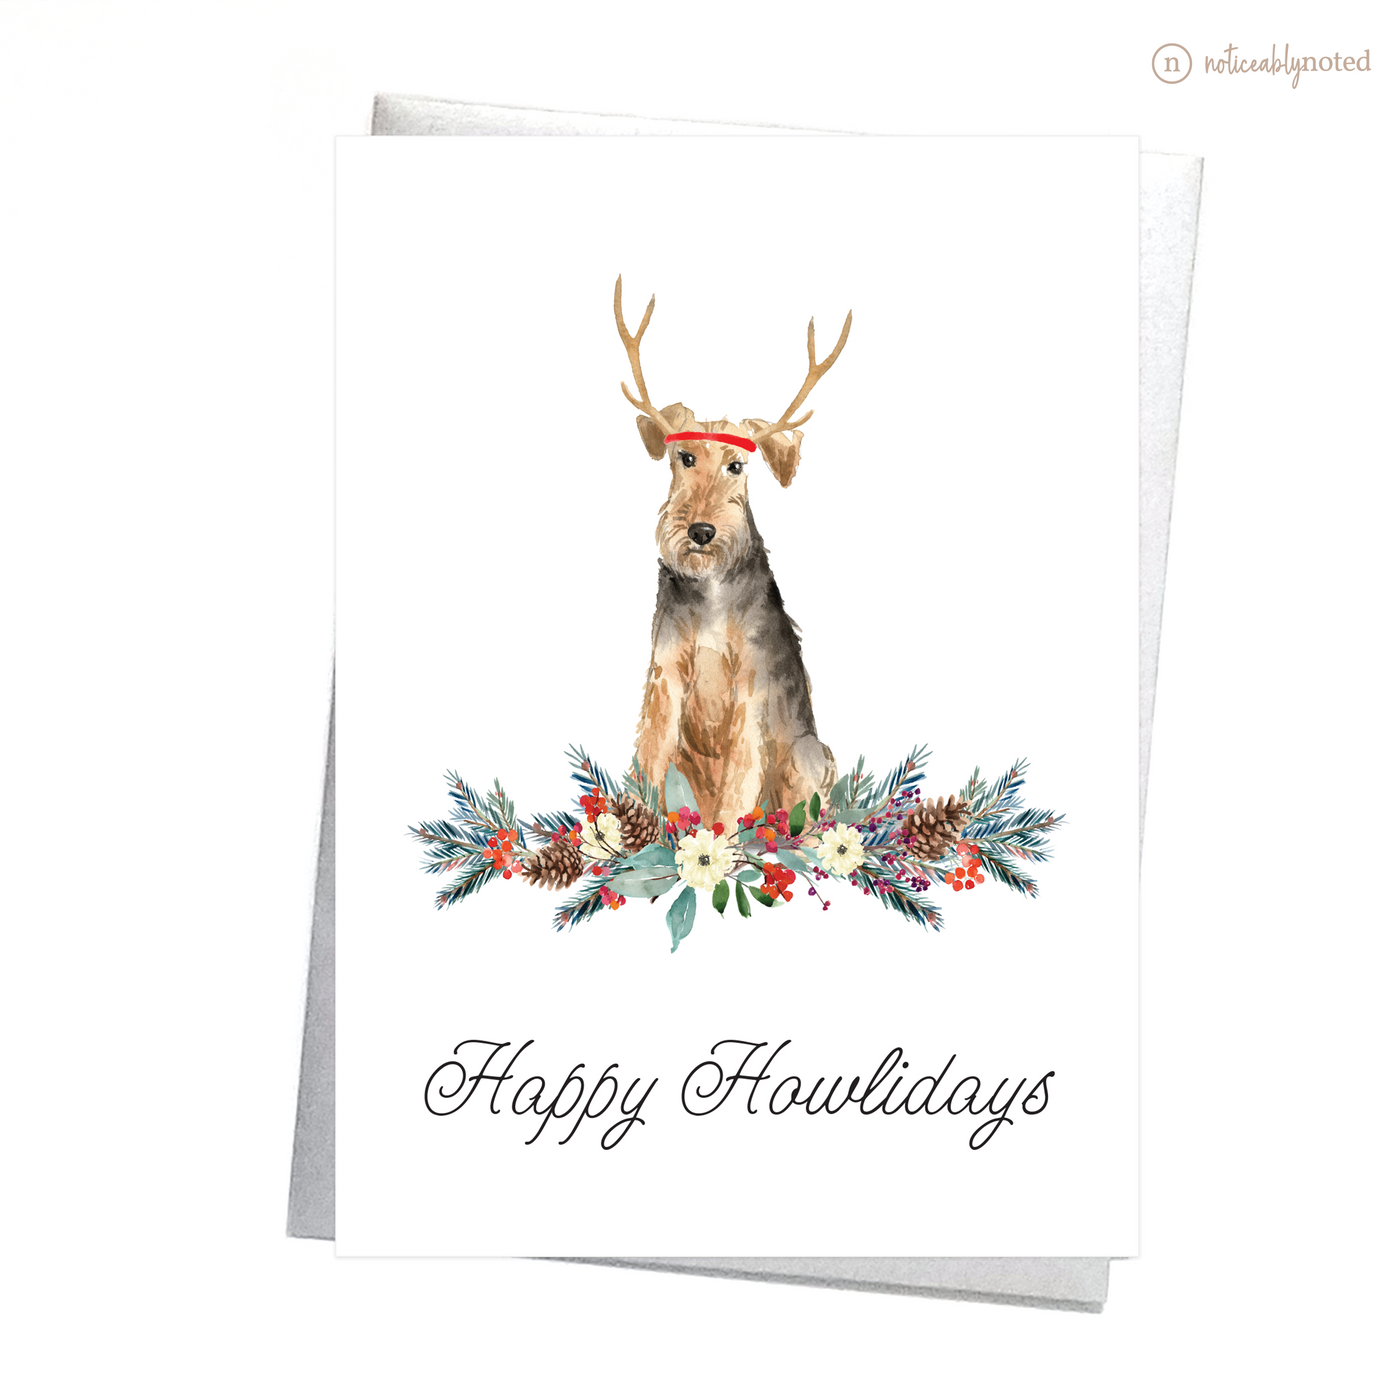 Welsh Terrier Holiday Greeting Cards | Noticeably Noted